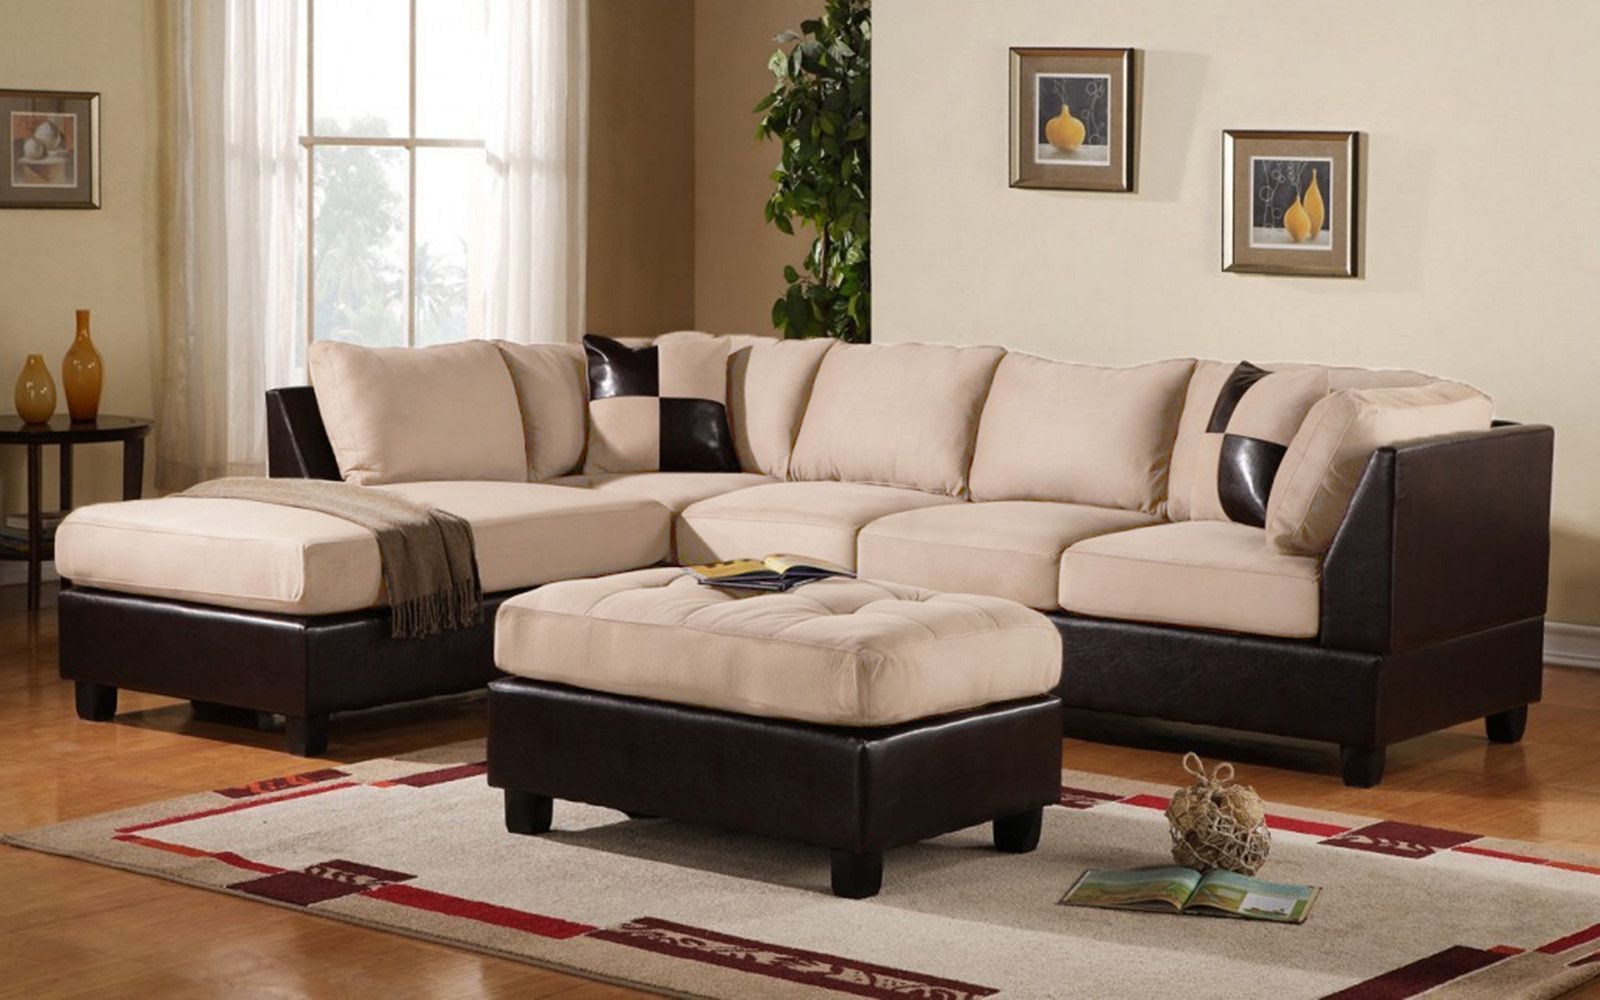 Koko Microfiber Bonded Leather Sectional | Microfiber Inside 3pc Bonded Leather Upholstered Wooden Sectional Sofas Brown (Photo 1 of 15)